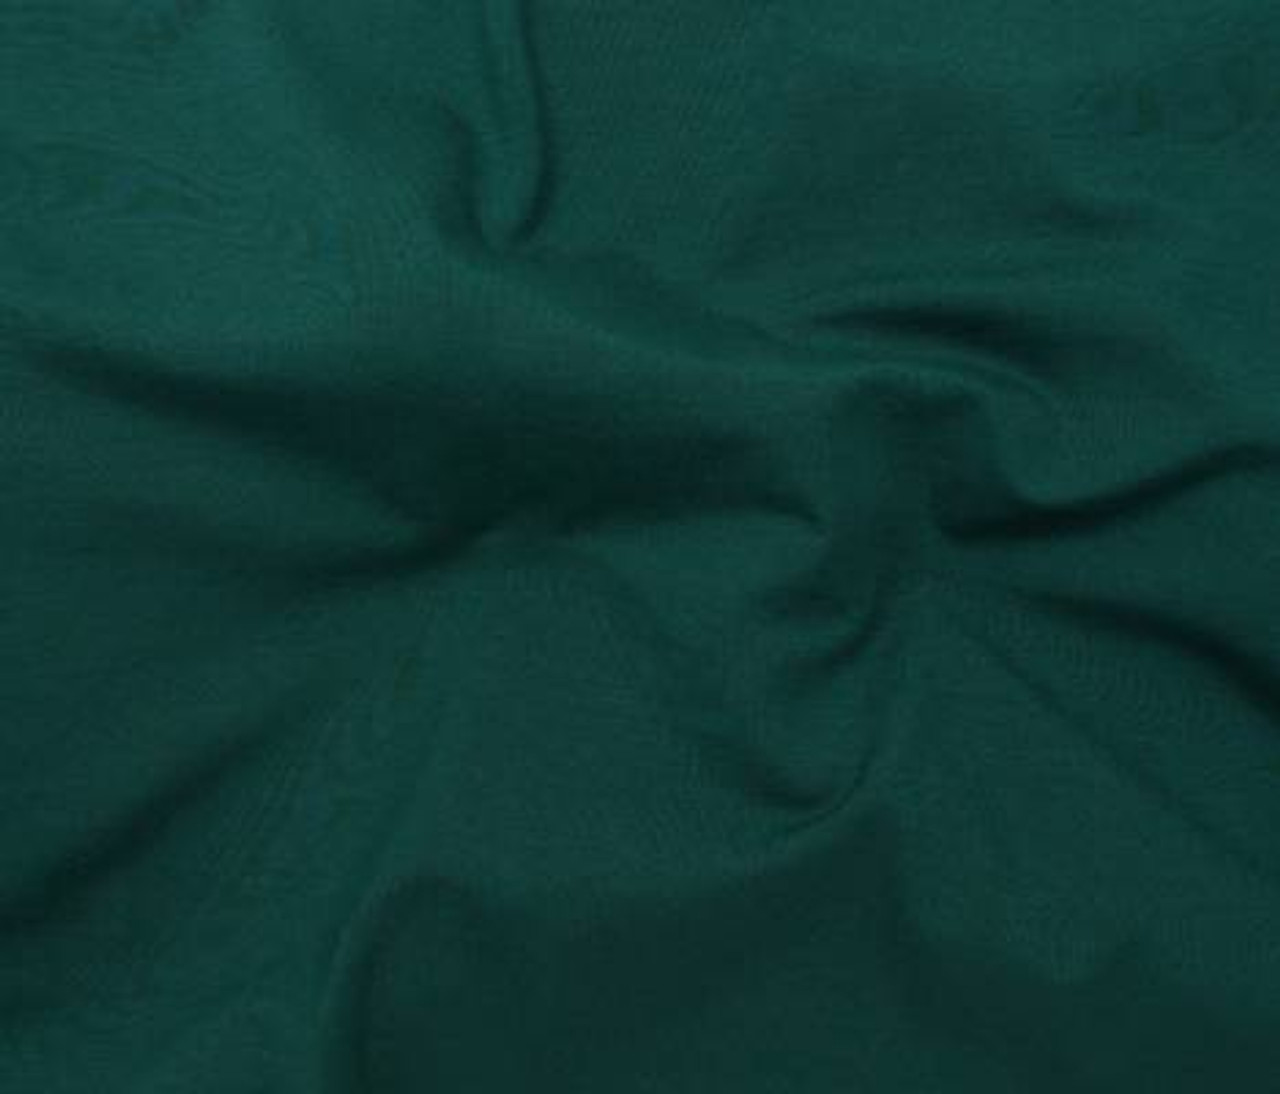 DARK GREEN SOFTIQUE RAYON VISCOSE KNIT FABRIC - SOLD BY THE 1/2 YARD -  Angela Wolf Pattern Collection